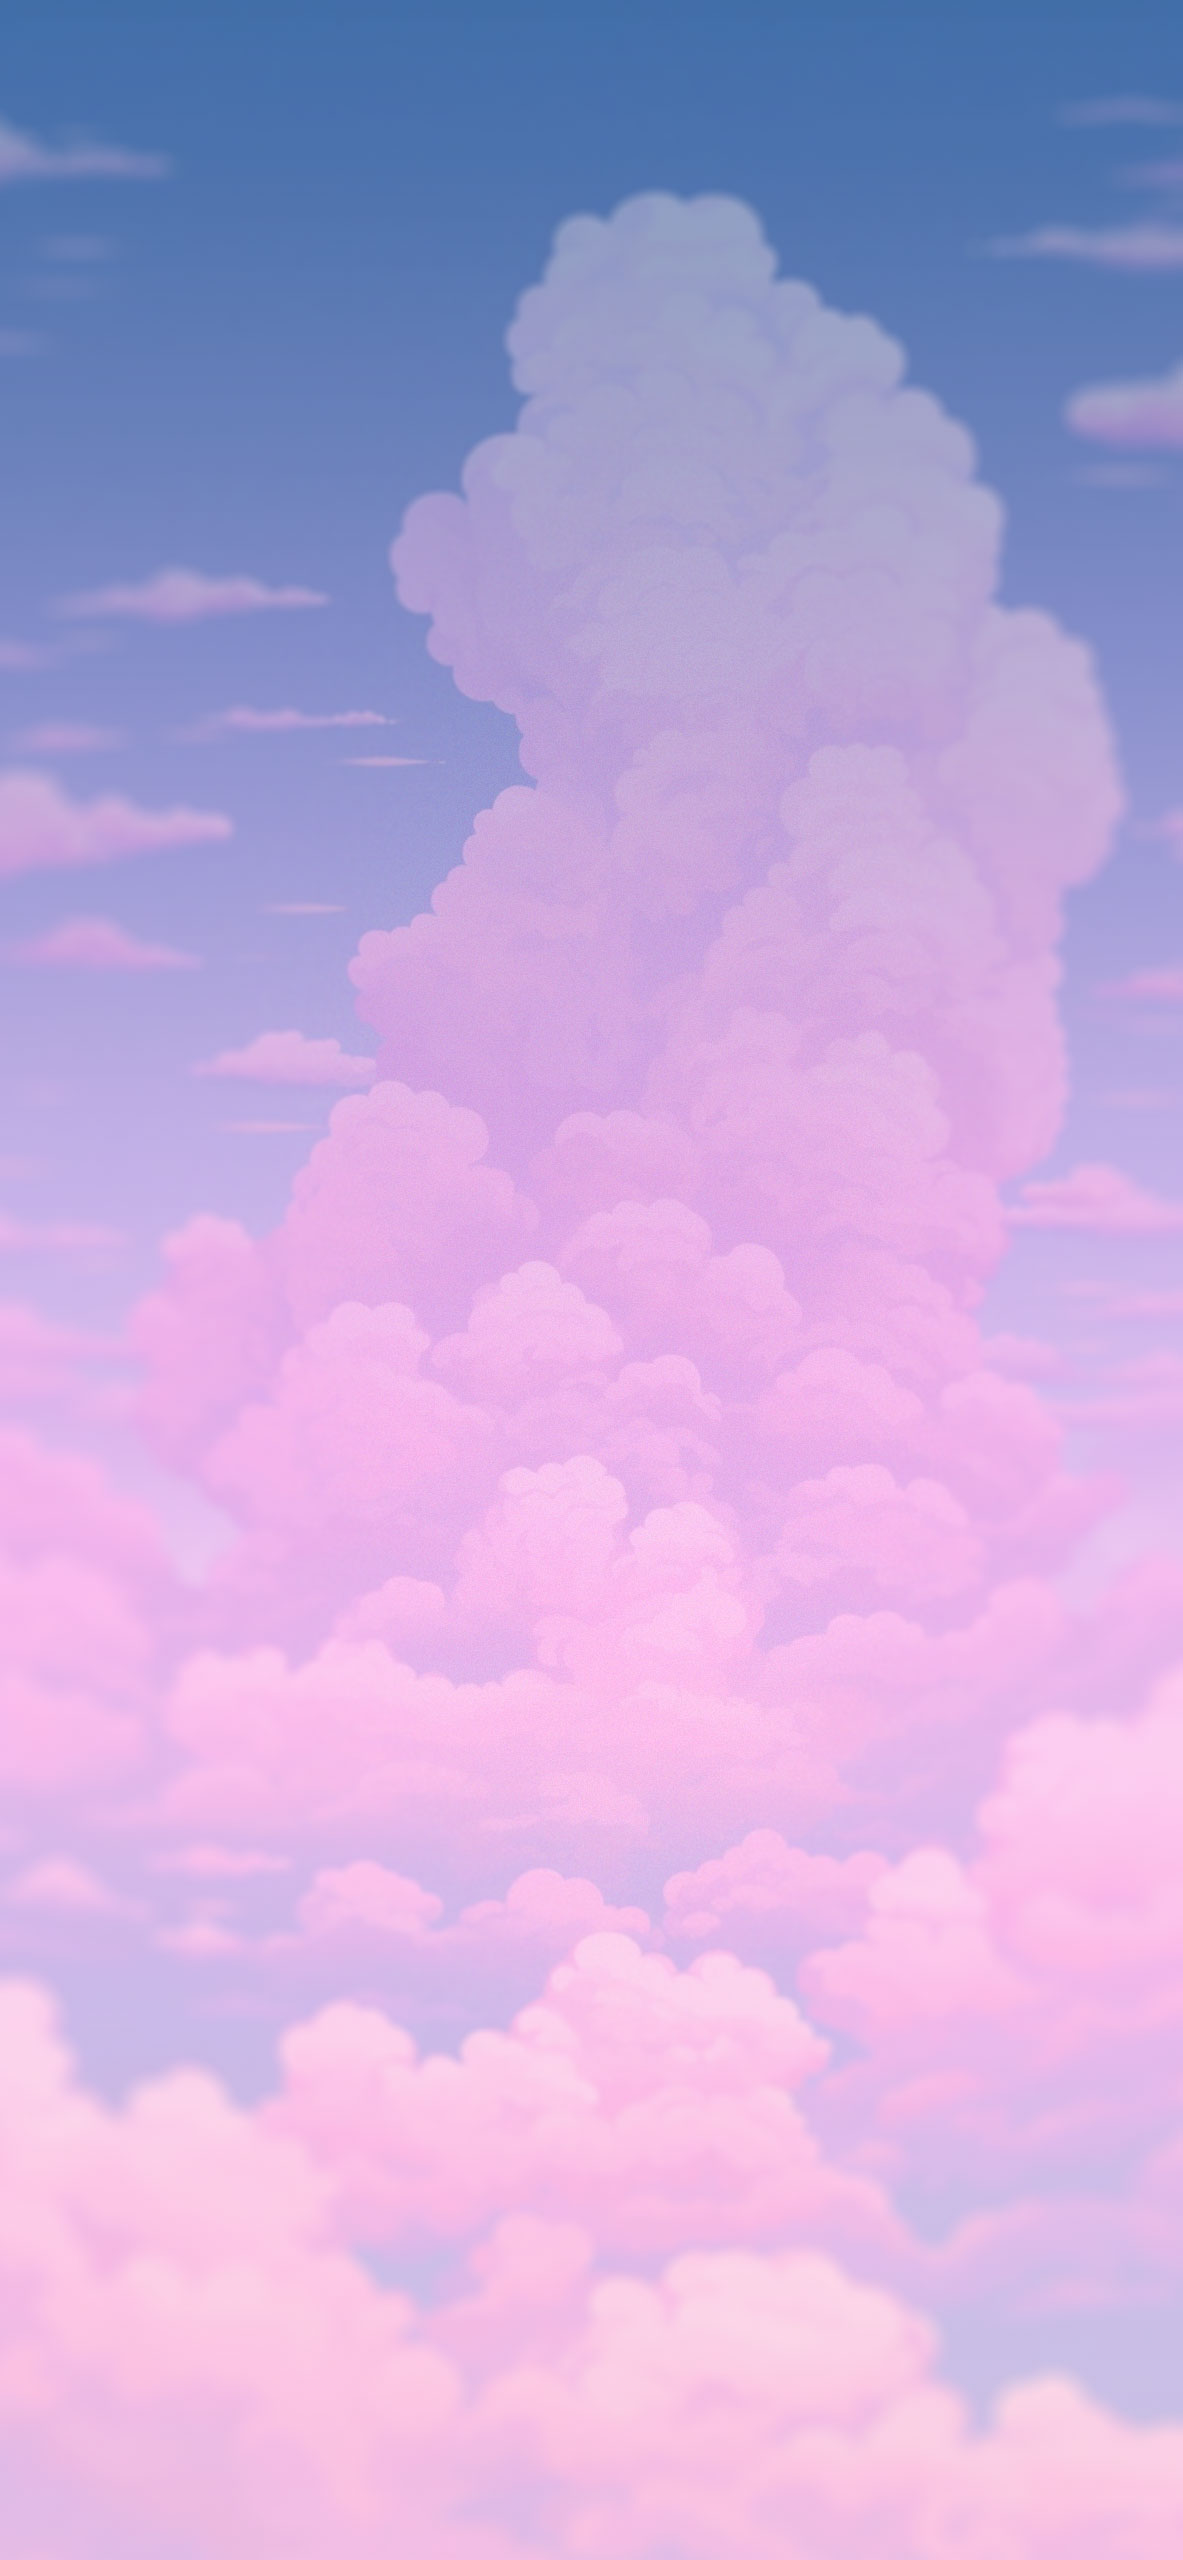 15+ Aesthetic Cloud Wallpapers For Your Phone - The Violet Journal